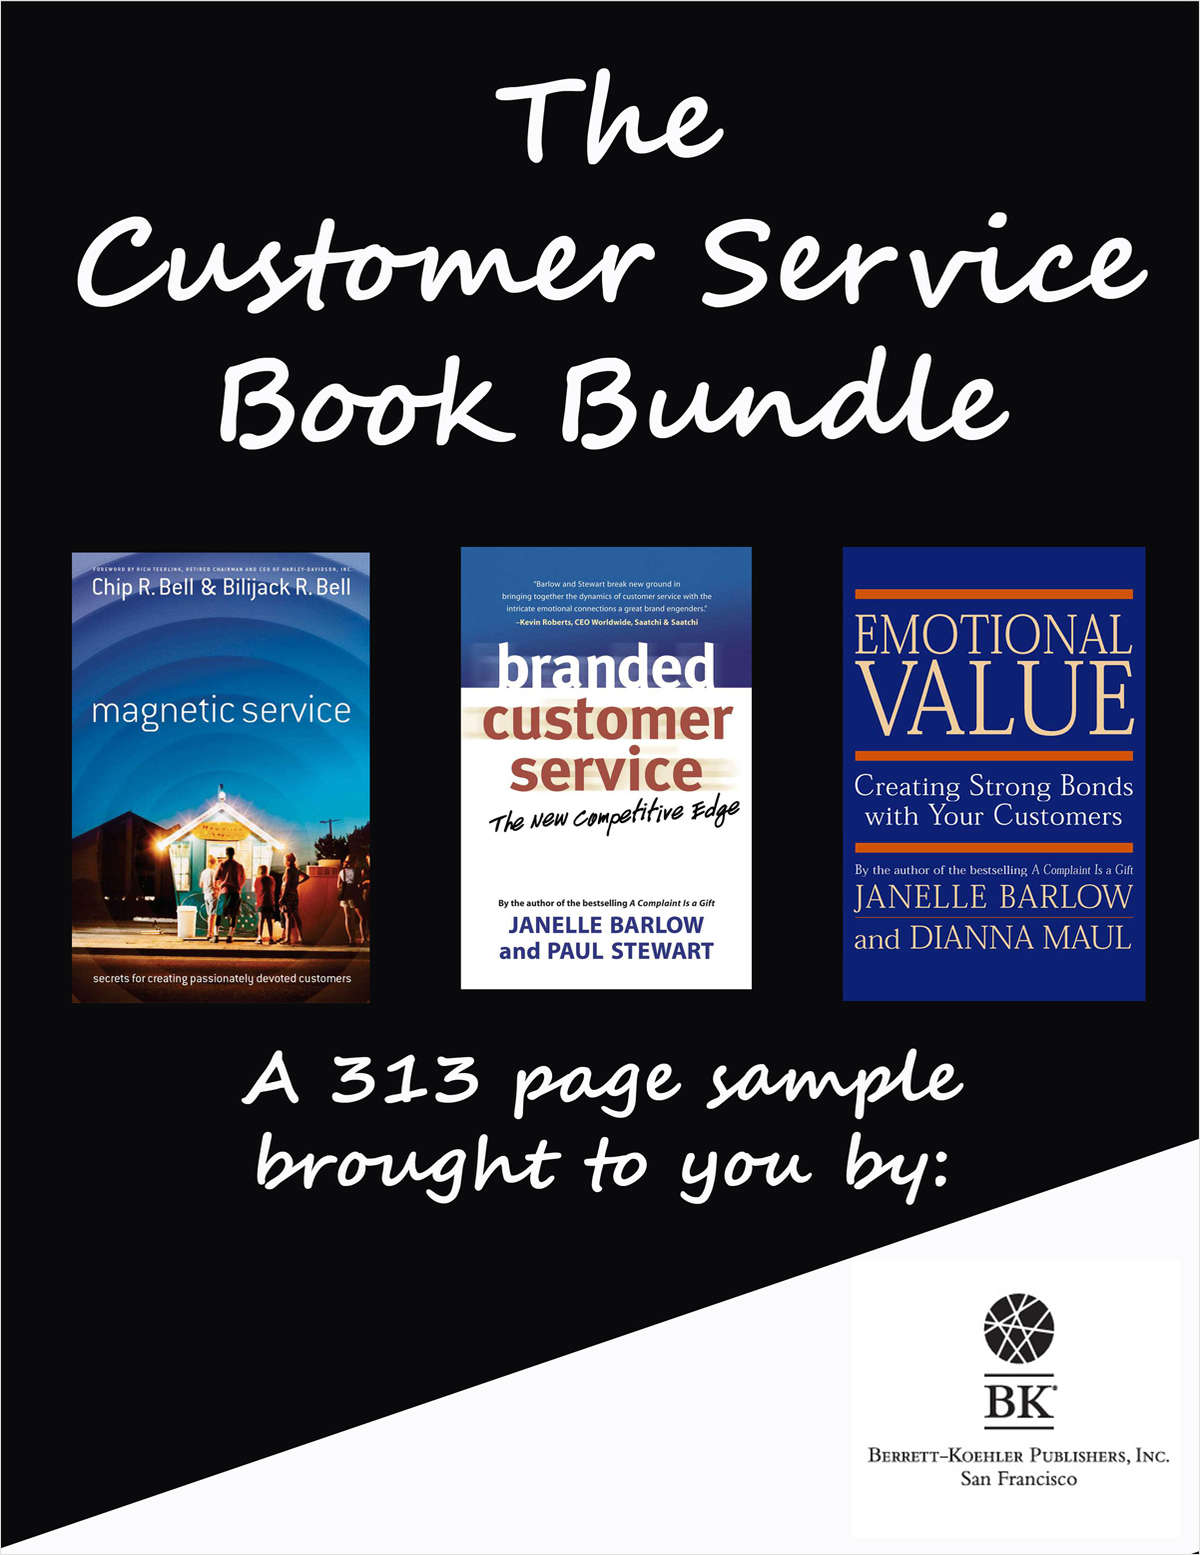 The Customer Service Book Bundle -- A 313 Page Sample from Berrett-Koehler